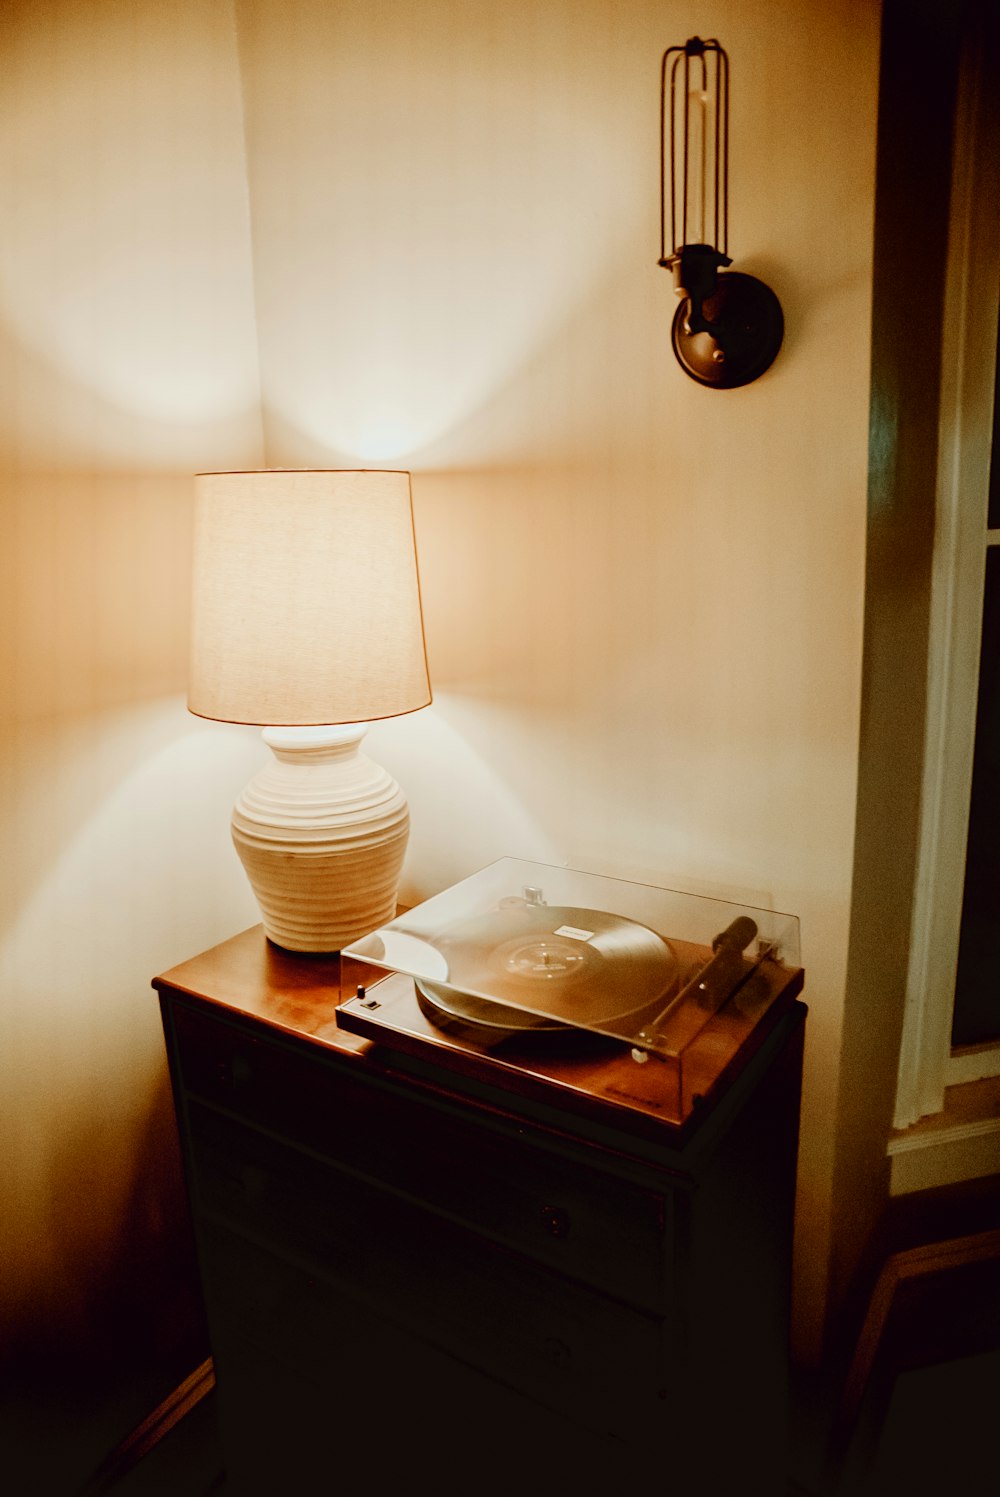 a table with a lamp and a plate on it